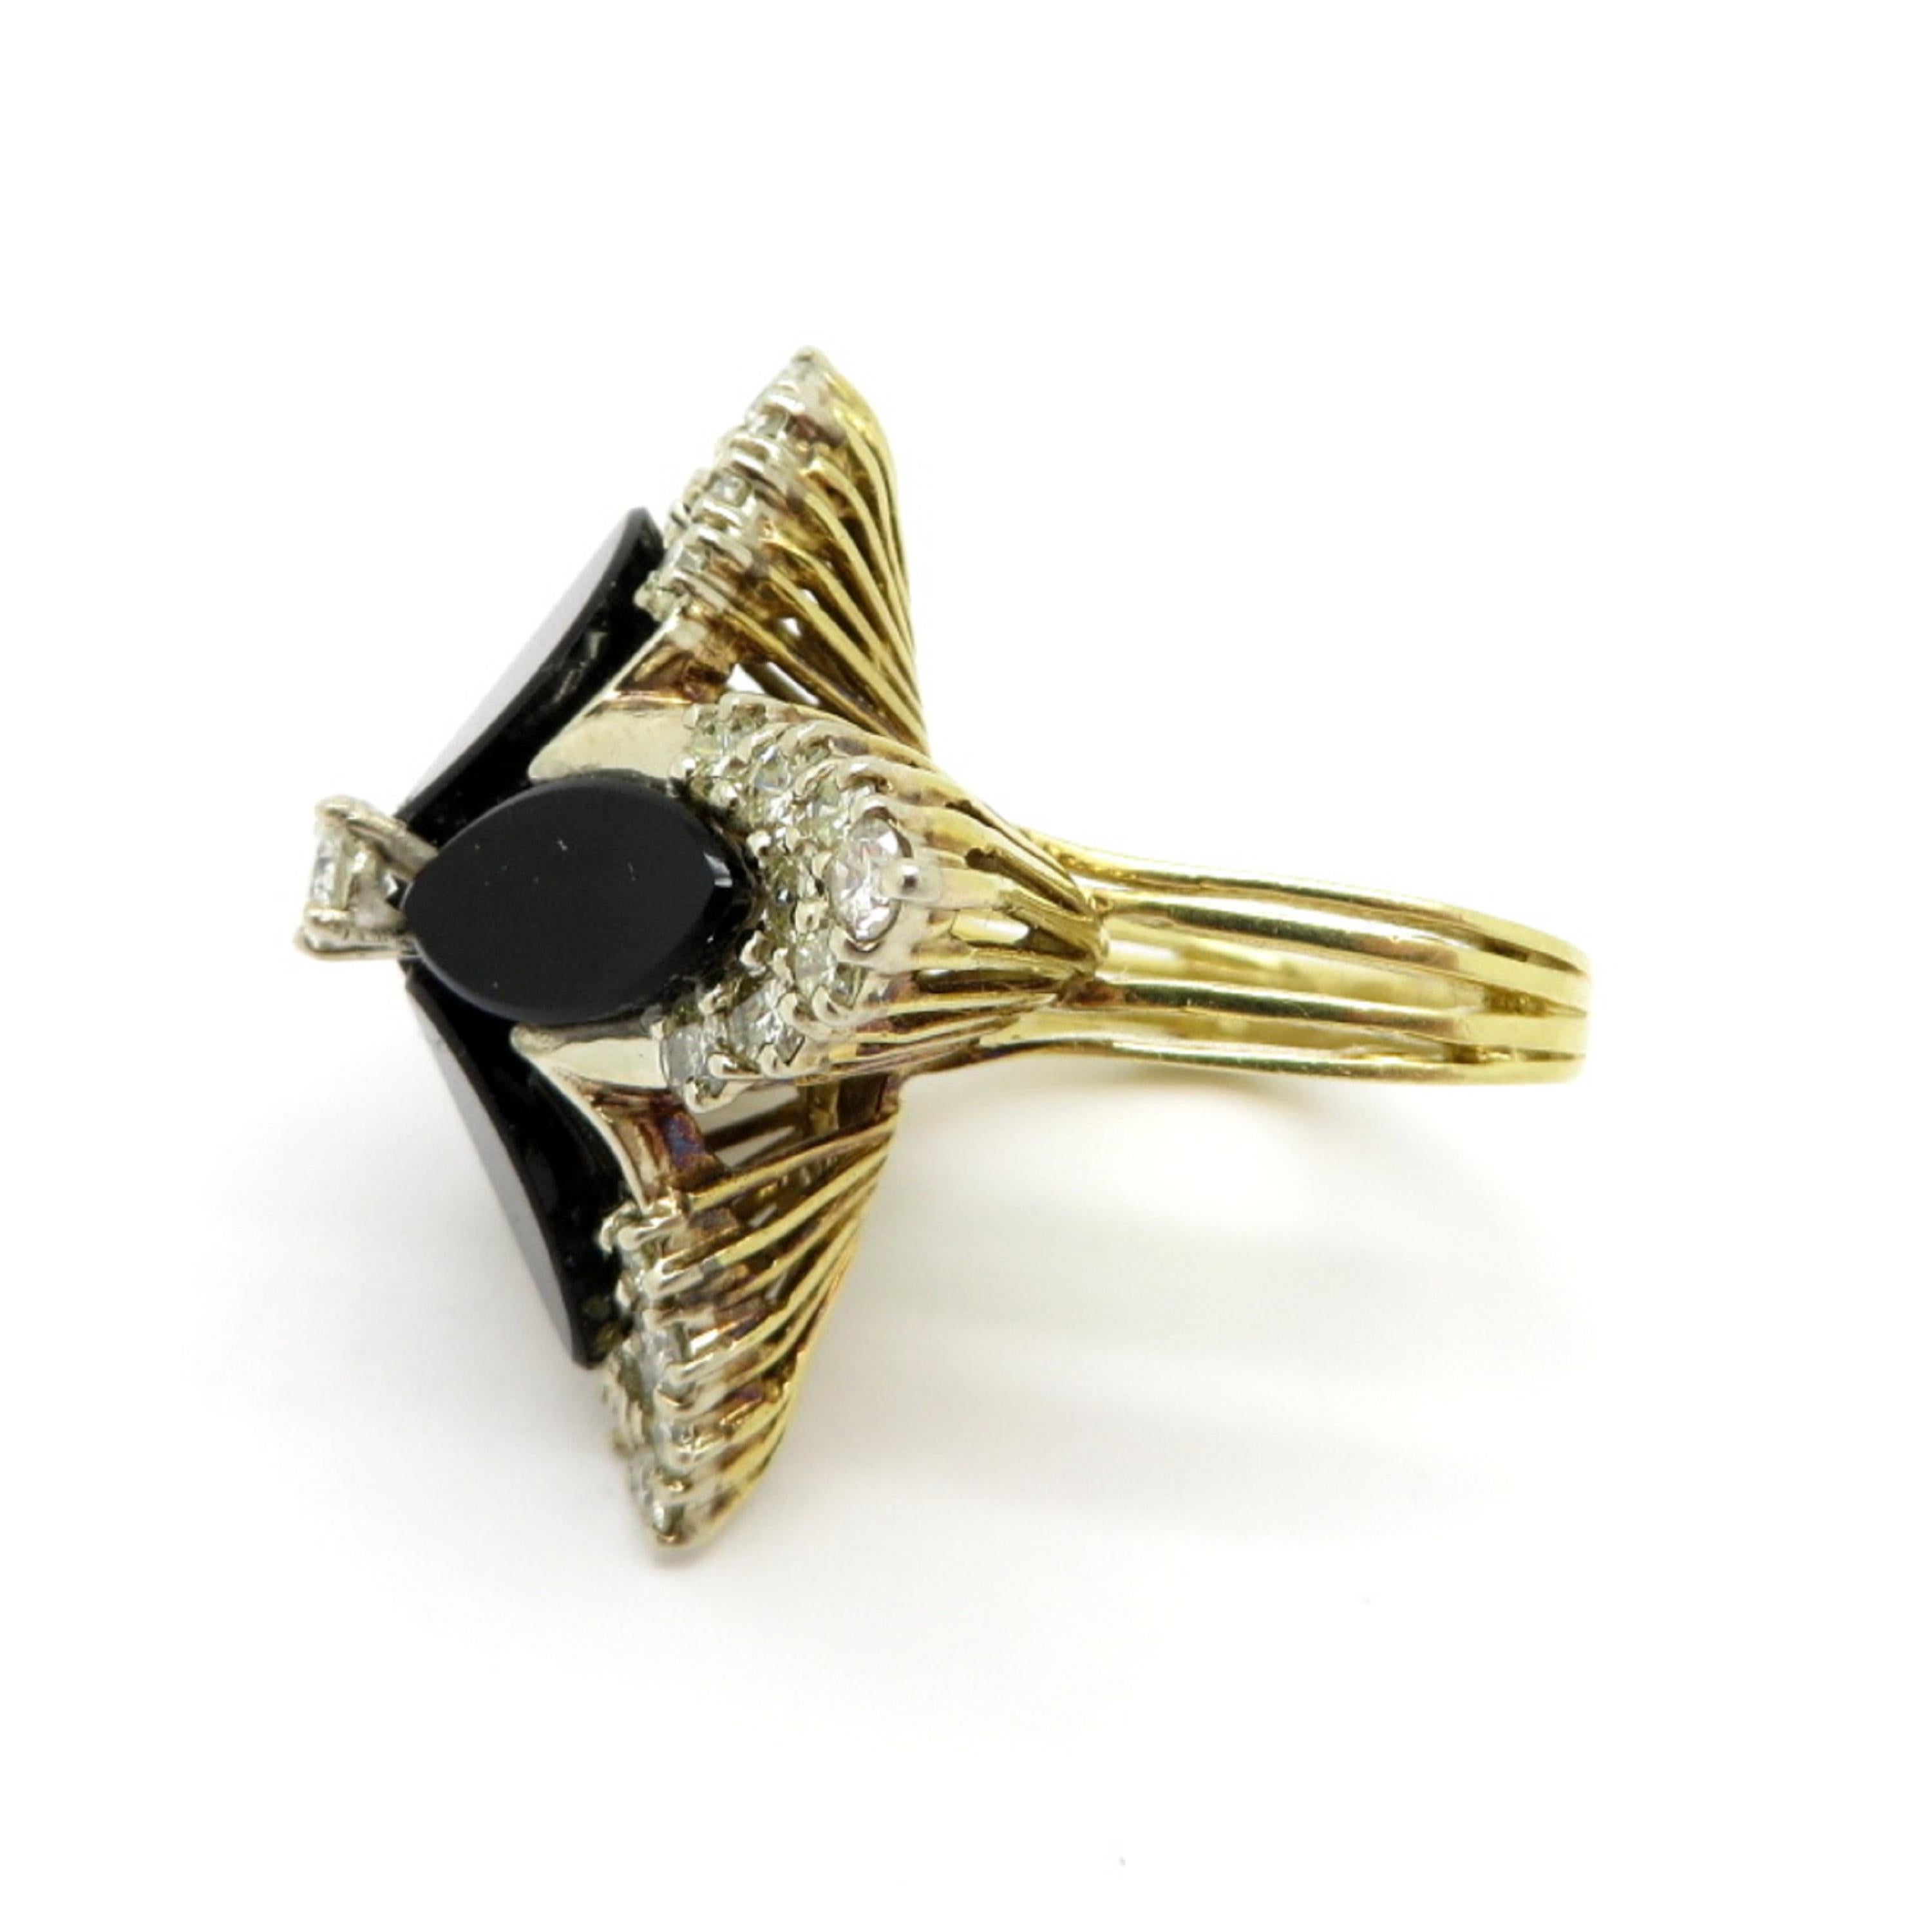 Estate 14K yellow gold onyx flower design diamond ring. Showcasing 33 round brilliant cut prong set diamonds weighing a total of 1.75 carats. Featuring four onyx gemstones inlaid in the shape of flower petals. The ring features a triangle shaped